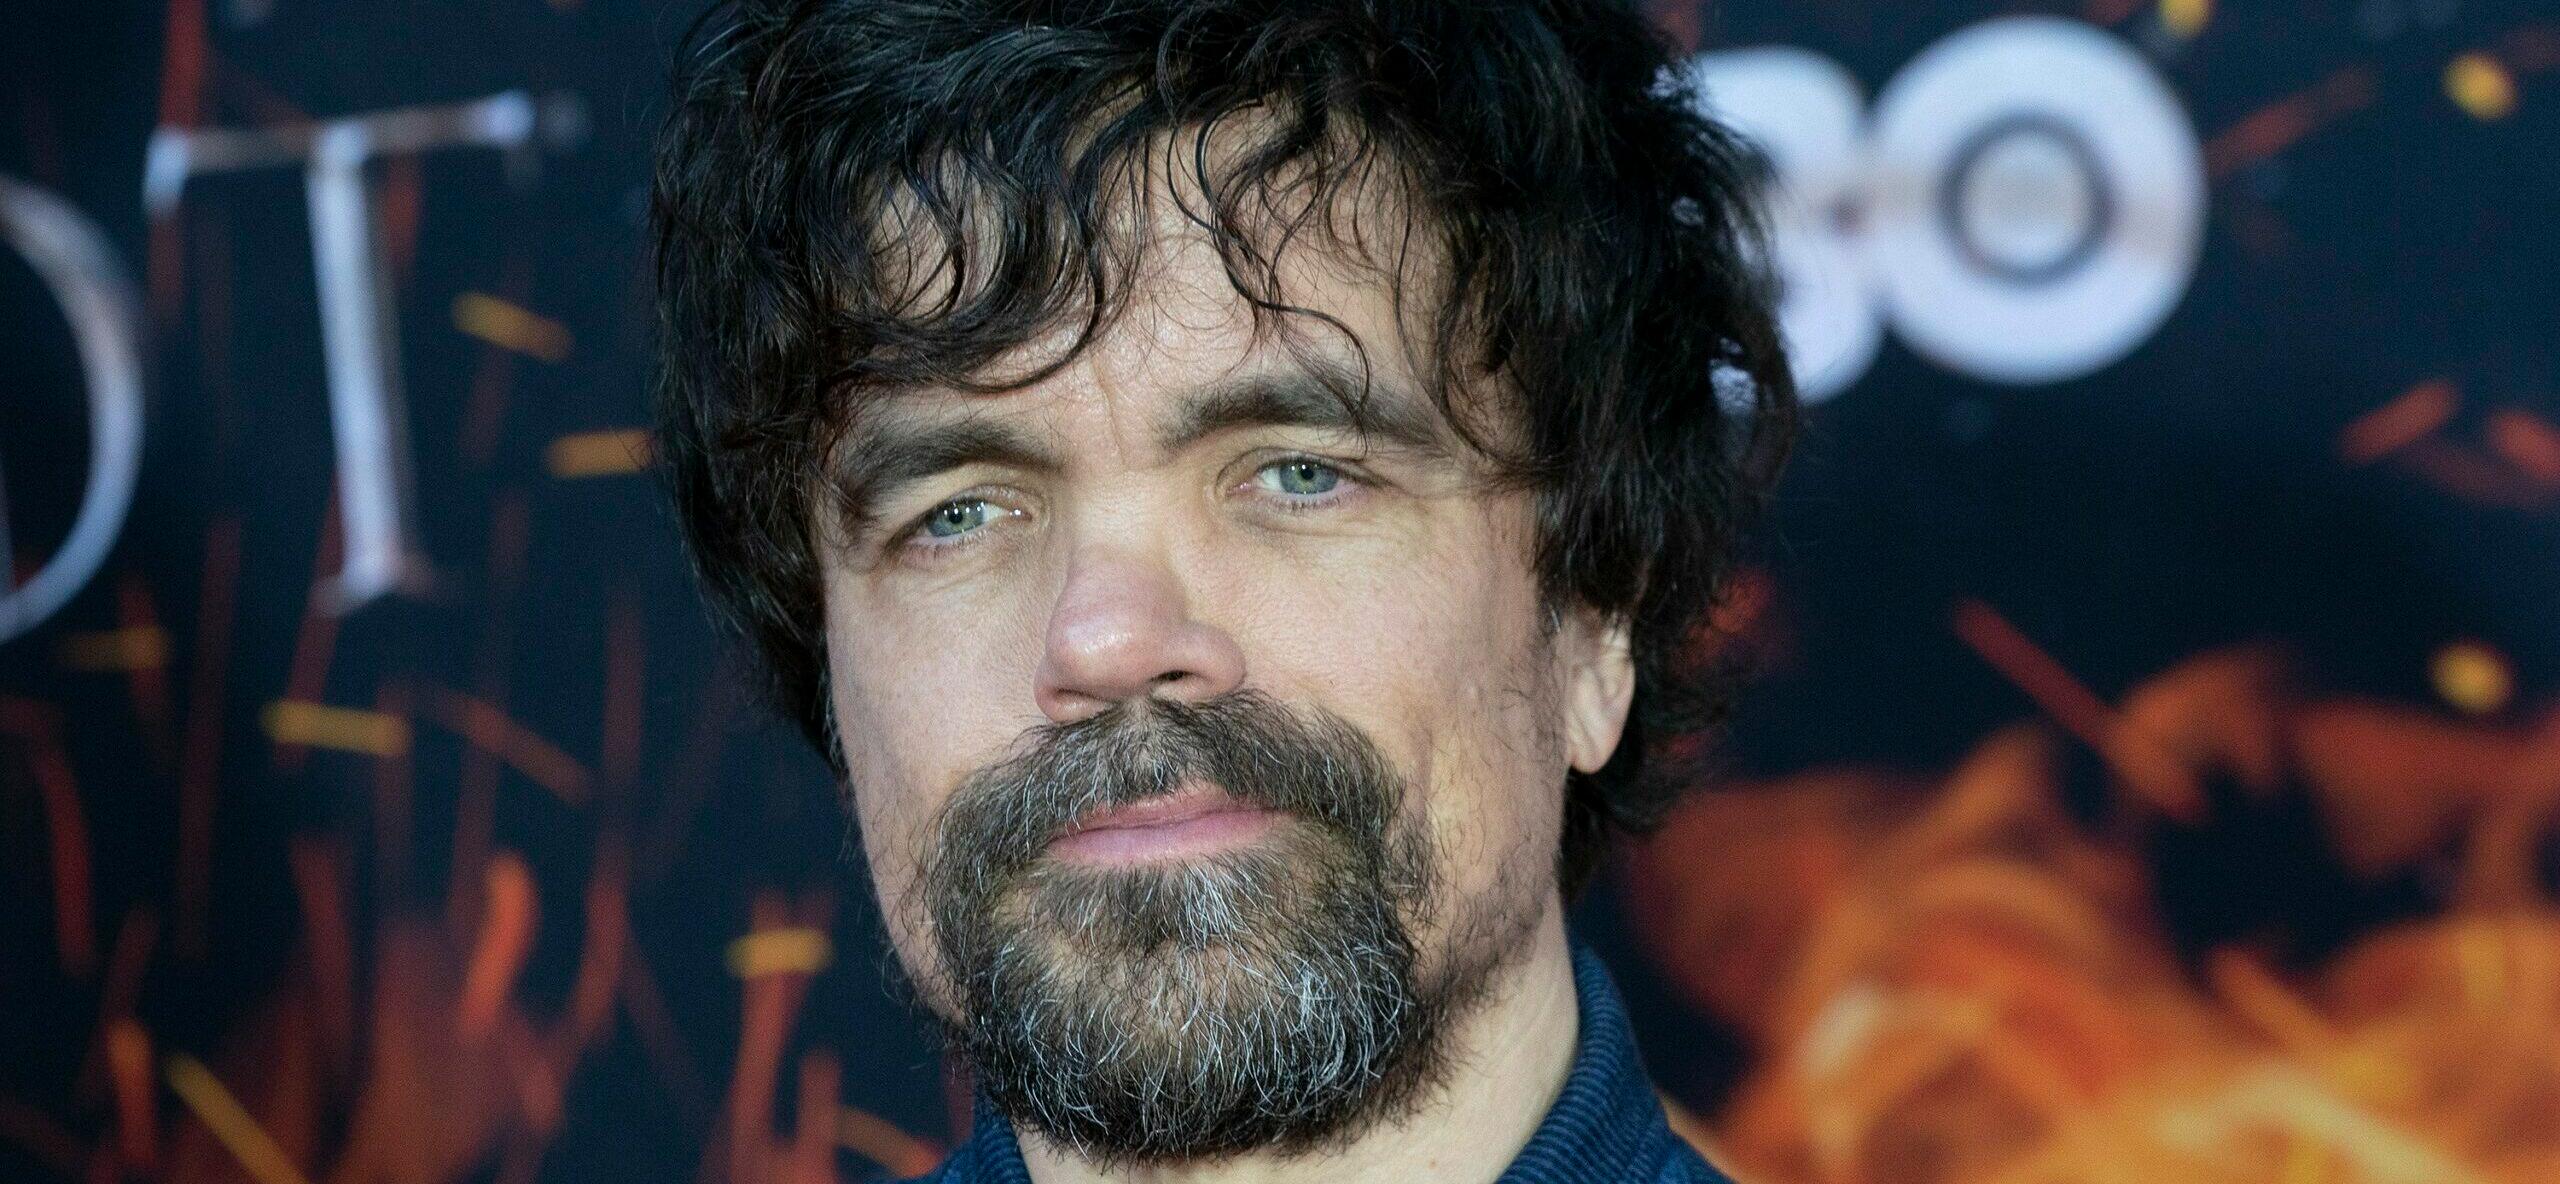 NEW YORK, NY APRIL 03: Peter Dinklage attends HBO 'Game of Thrones' final season premiere at Radio City Music Hall on April 03, 2019 in New York City. 03 Apr 2019 Pictured: NEW YORK, NY APRIL 03: Peter Dinklage attends HBO 'Game of Thrones' final season premiere at Radio City Music Hall on April 03, 2019 in New York City. Photo credit: Ron Adar / M10s / MEGA TheMegaAgency.com +1 888 505 6342 (Mega Agency TagID: MEGA395137_009.jpg) [Photo via Mega Agency]